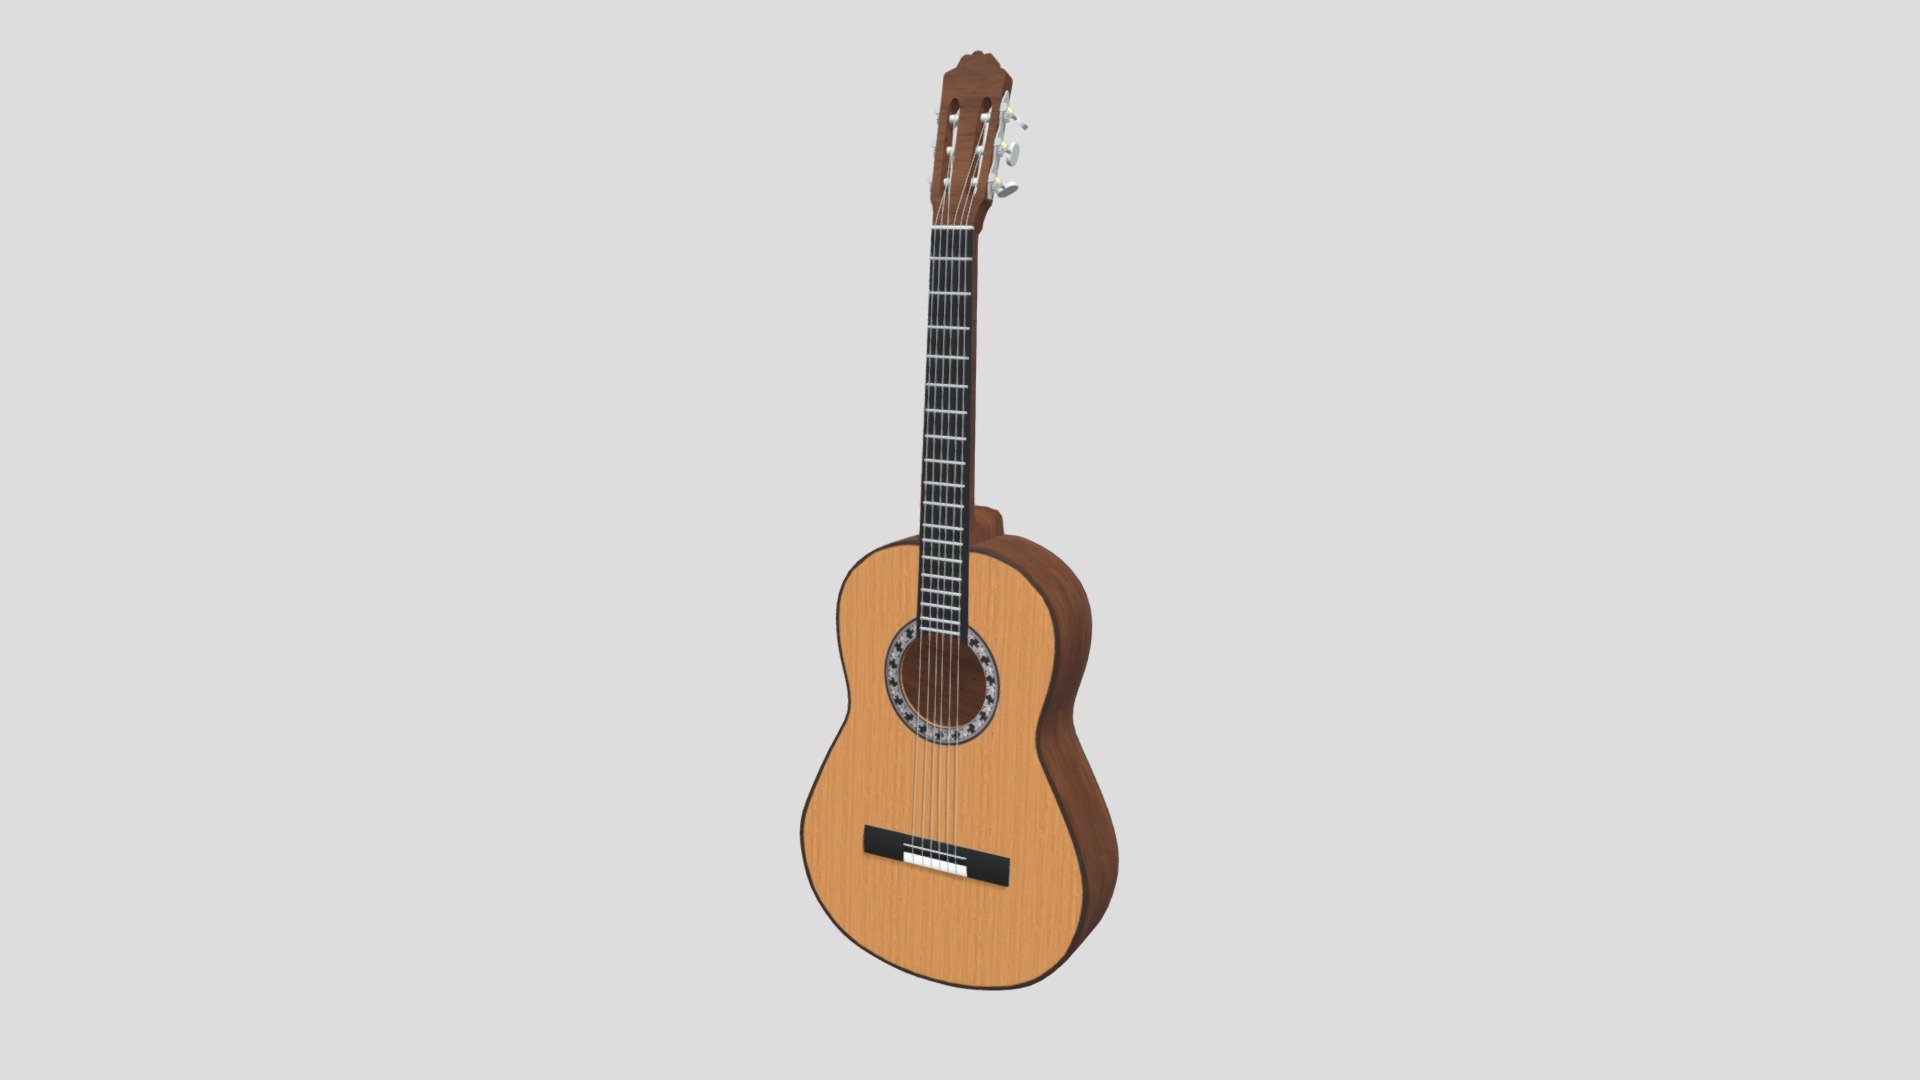 This model contains a classic guitar or spanish guitar based on a couple of pictures which i modeled in Maya 2018. This model is perfect to create an old lowpoly scene, a music scene or whatever you need.

Everything is in one piece, if you need this model for an animation or something else and you need every piece separated ask for it and i will modify it for you.

If you need any kind of help contact me, i will help you with everything i can. If you like the model please give me some feedback, I would appreciate it.

If you experience any kind of difficulties, be sure to contact me and i will help you. Sincerely Yours, ViperJr3D - Classic Guitar - Buy Royalty Free 3D model by ViperJr3D 3d model